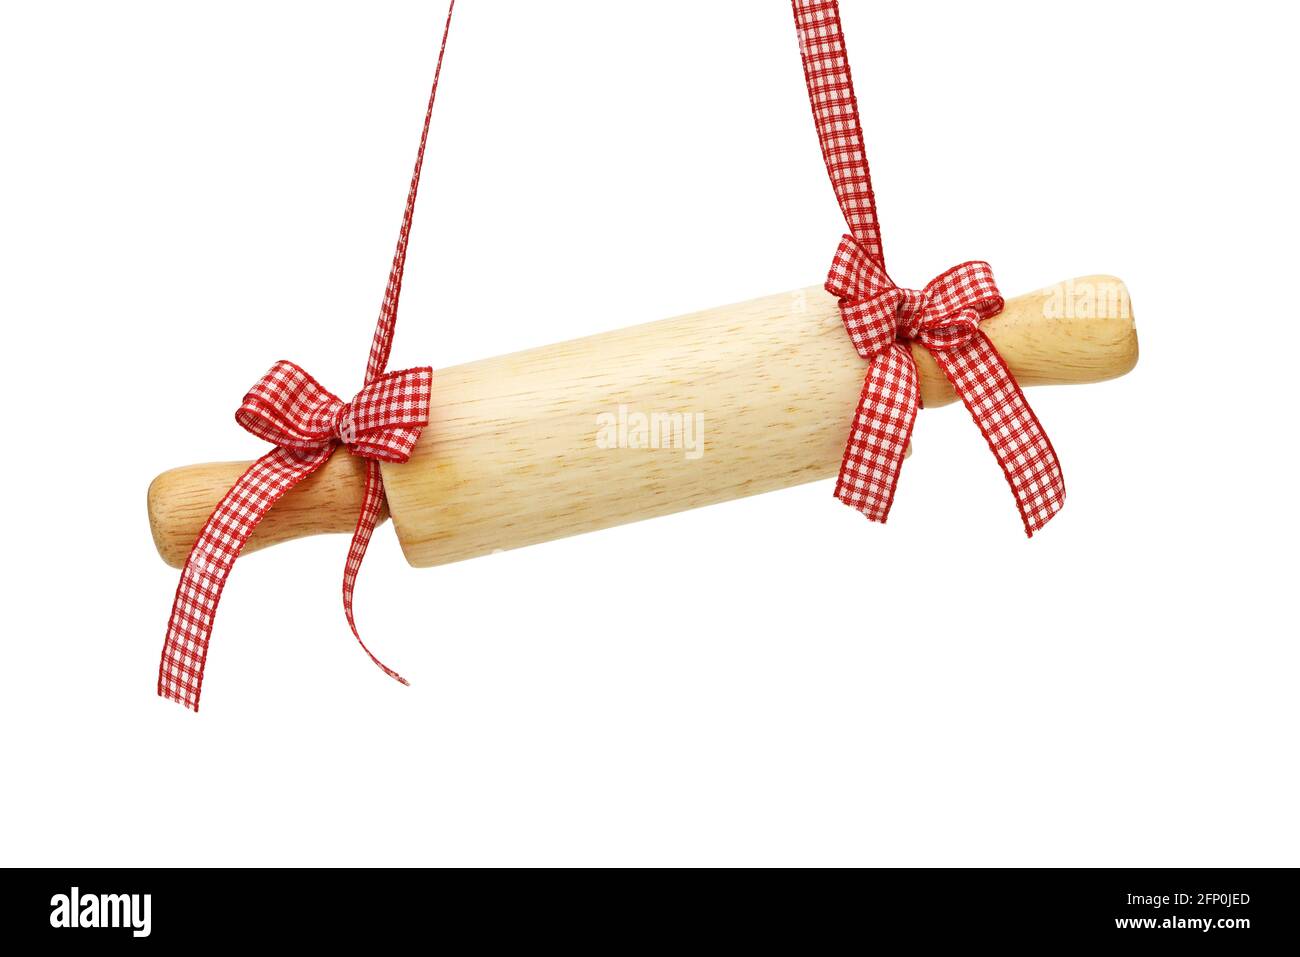 rolling pin hangs in front of white background Stock Photo